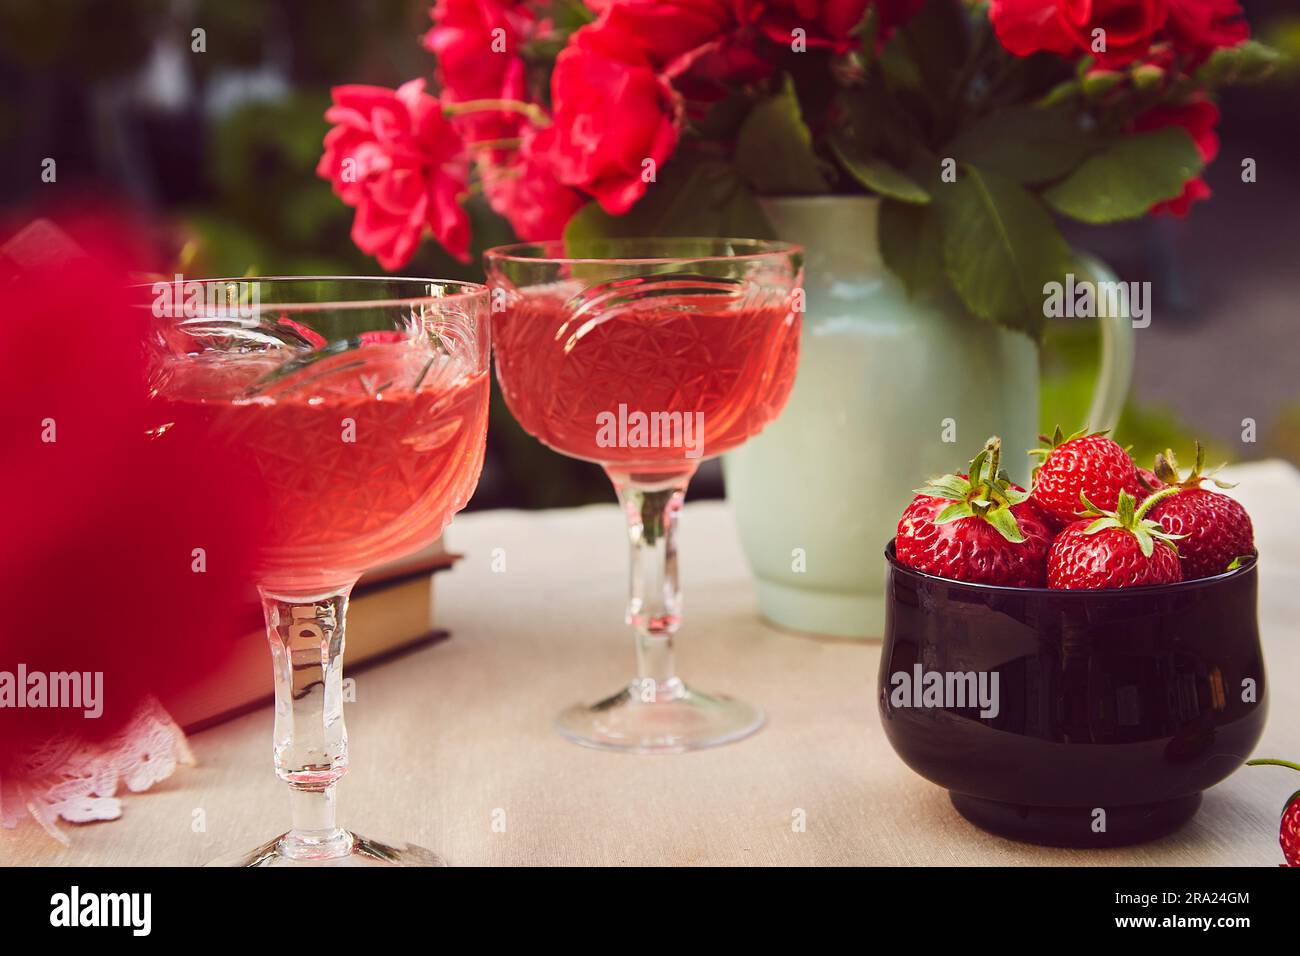 https://c8.alamy.com/comp/2RA24GM/cozy-aesthetic-table-setting-couple-of-glasess-with-red-homemade-strawberry-infusion-wine-roses-bouquet-2RA24GM.jpg